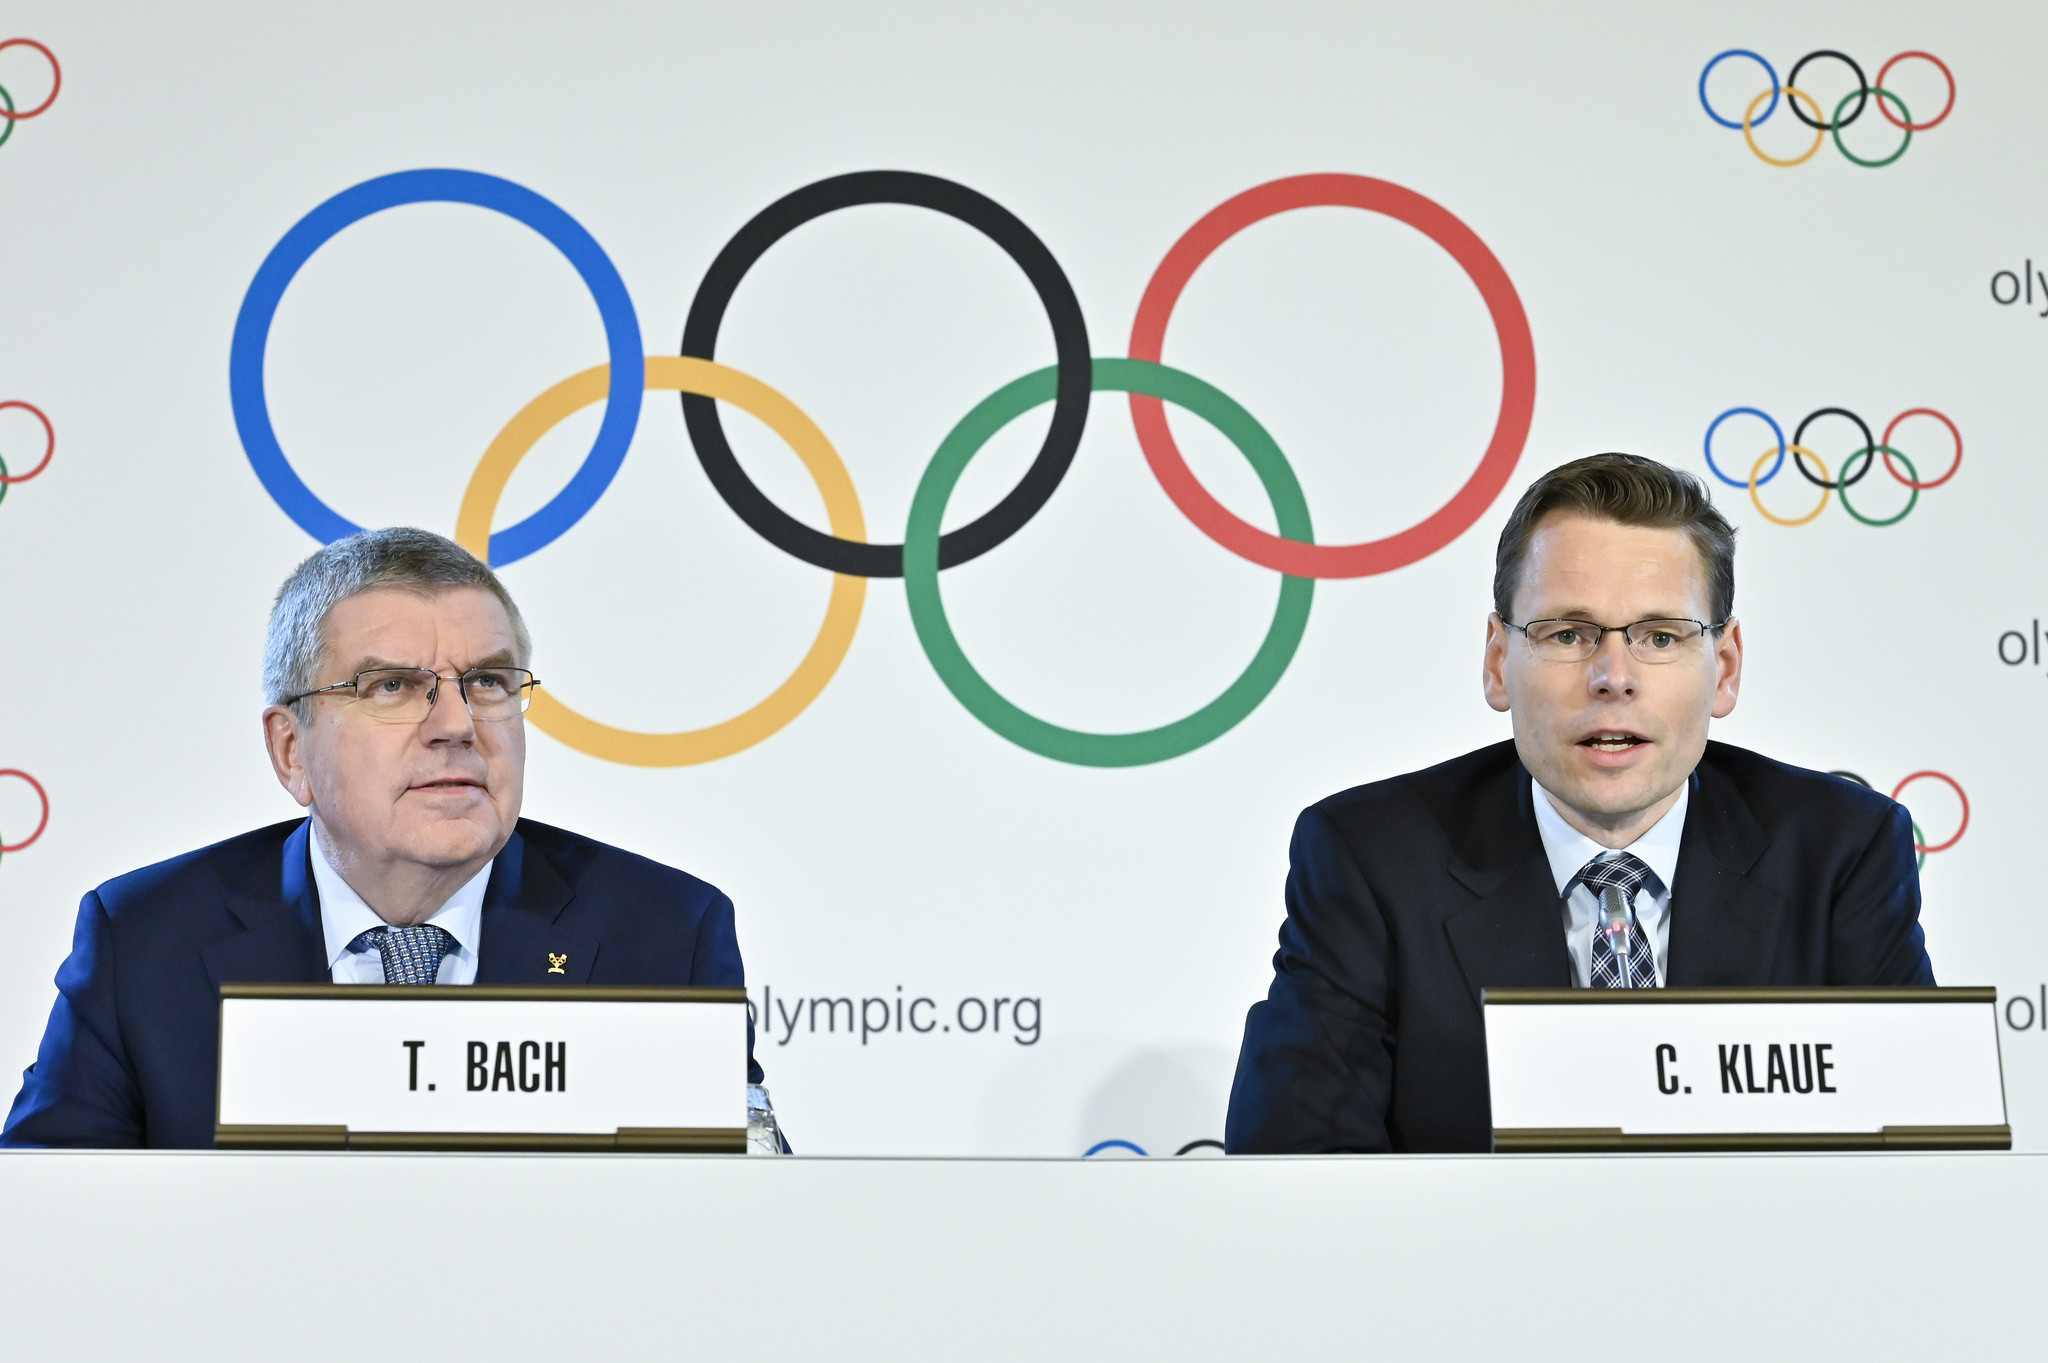 Korea discussions for Tokyo 2020 will not be affected by political situation claims Bach